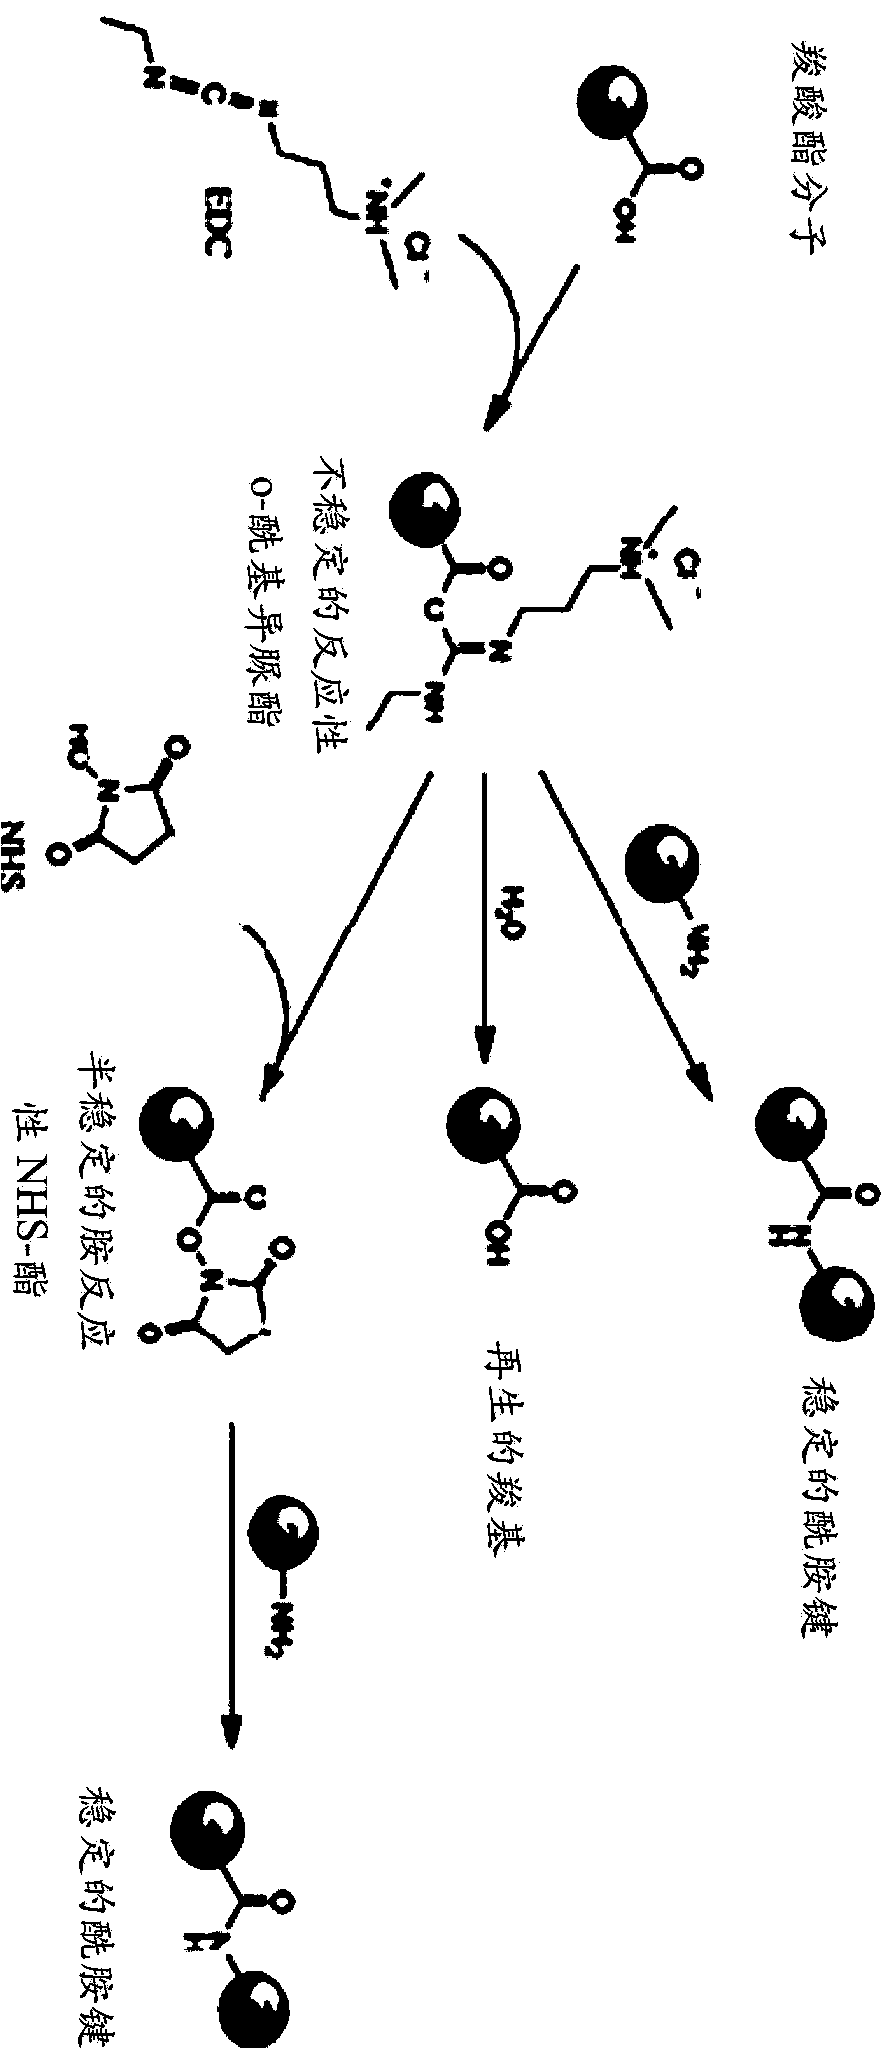 Preparation and/or formulation of proteins cross-linked with polysaccharides